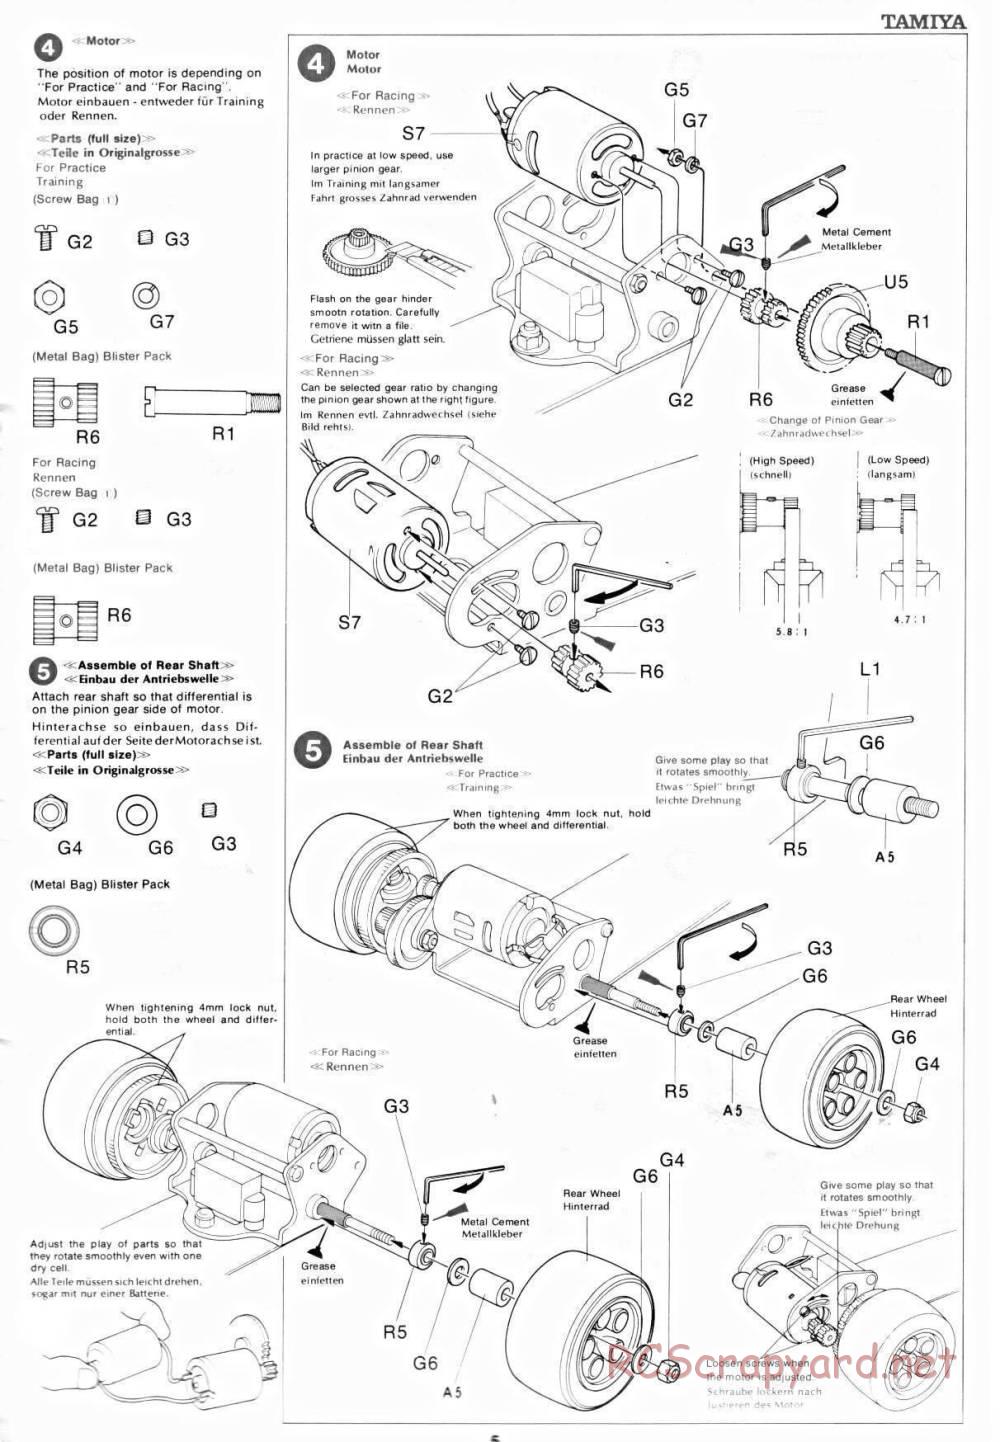 Tamiya - Lmbrghni Countach LP500S - 58005 - Manual - Page 5